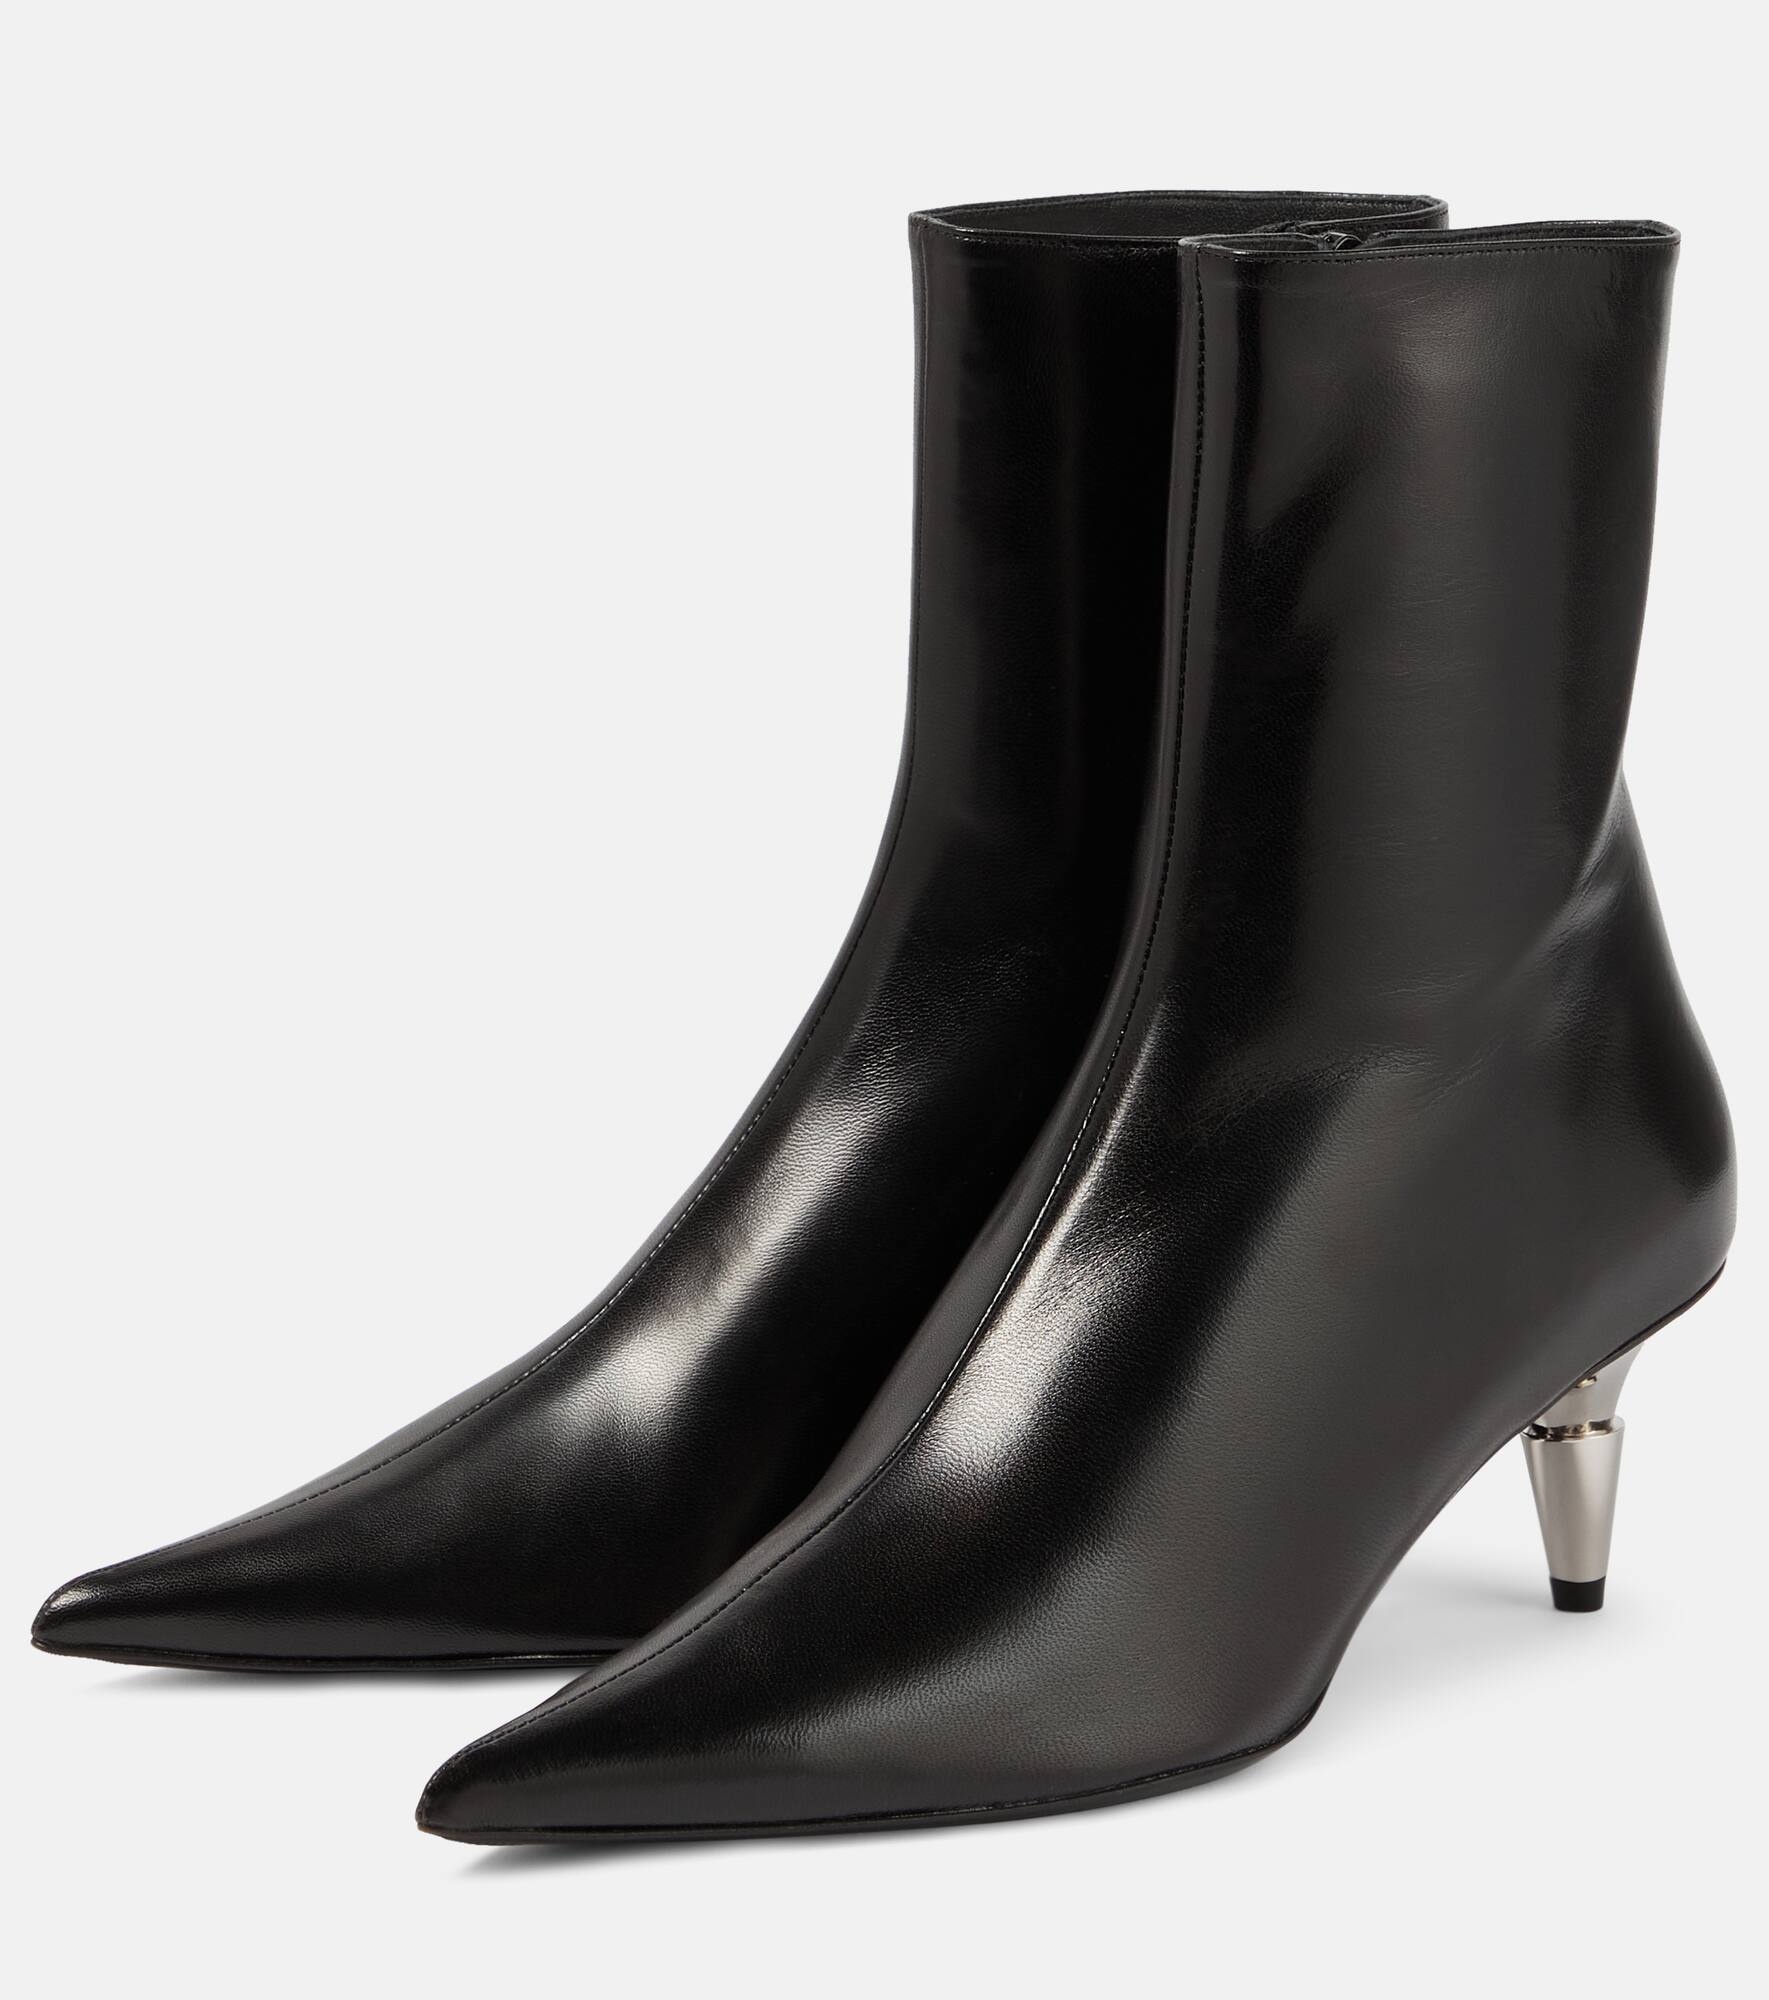 Spike leather ankle boots - 5